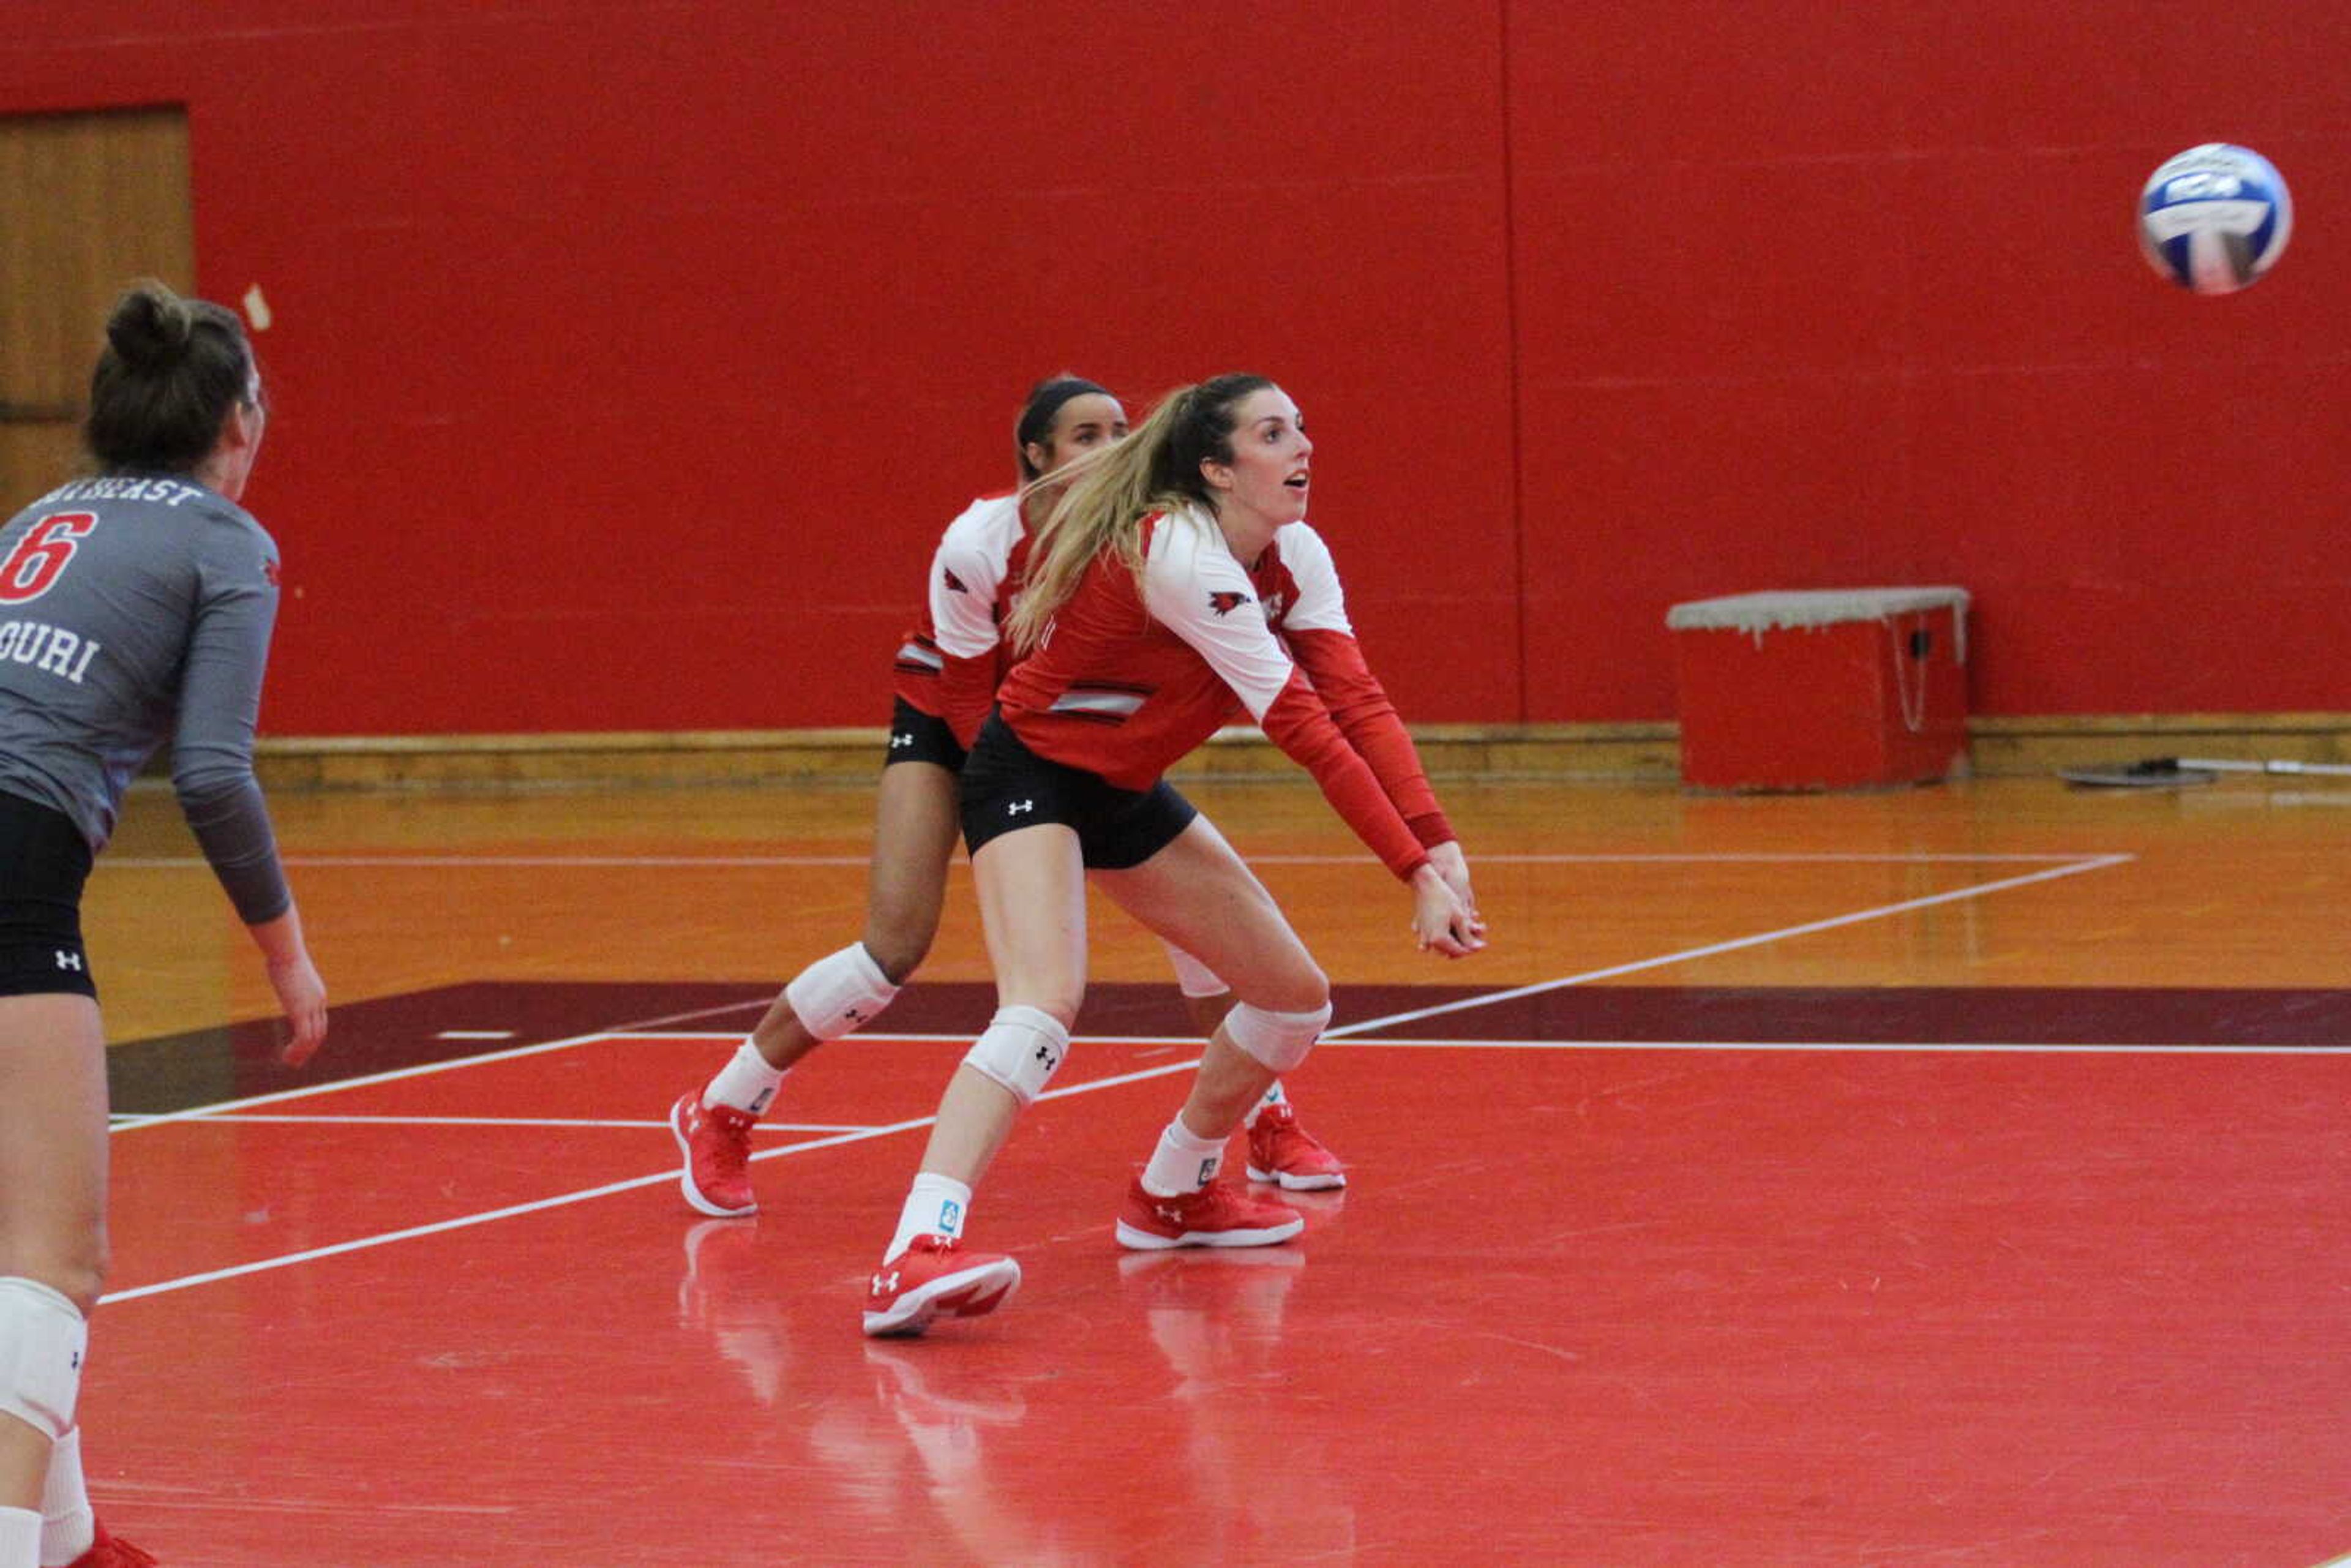 Sophomore Laney Malloy gets ready to bump the volleyball back to the opponent's side.